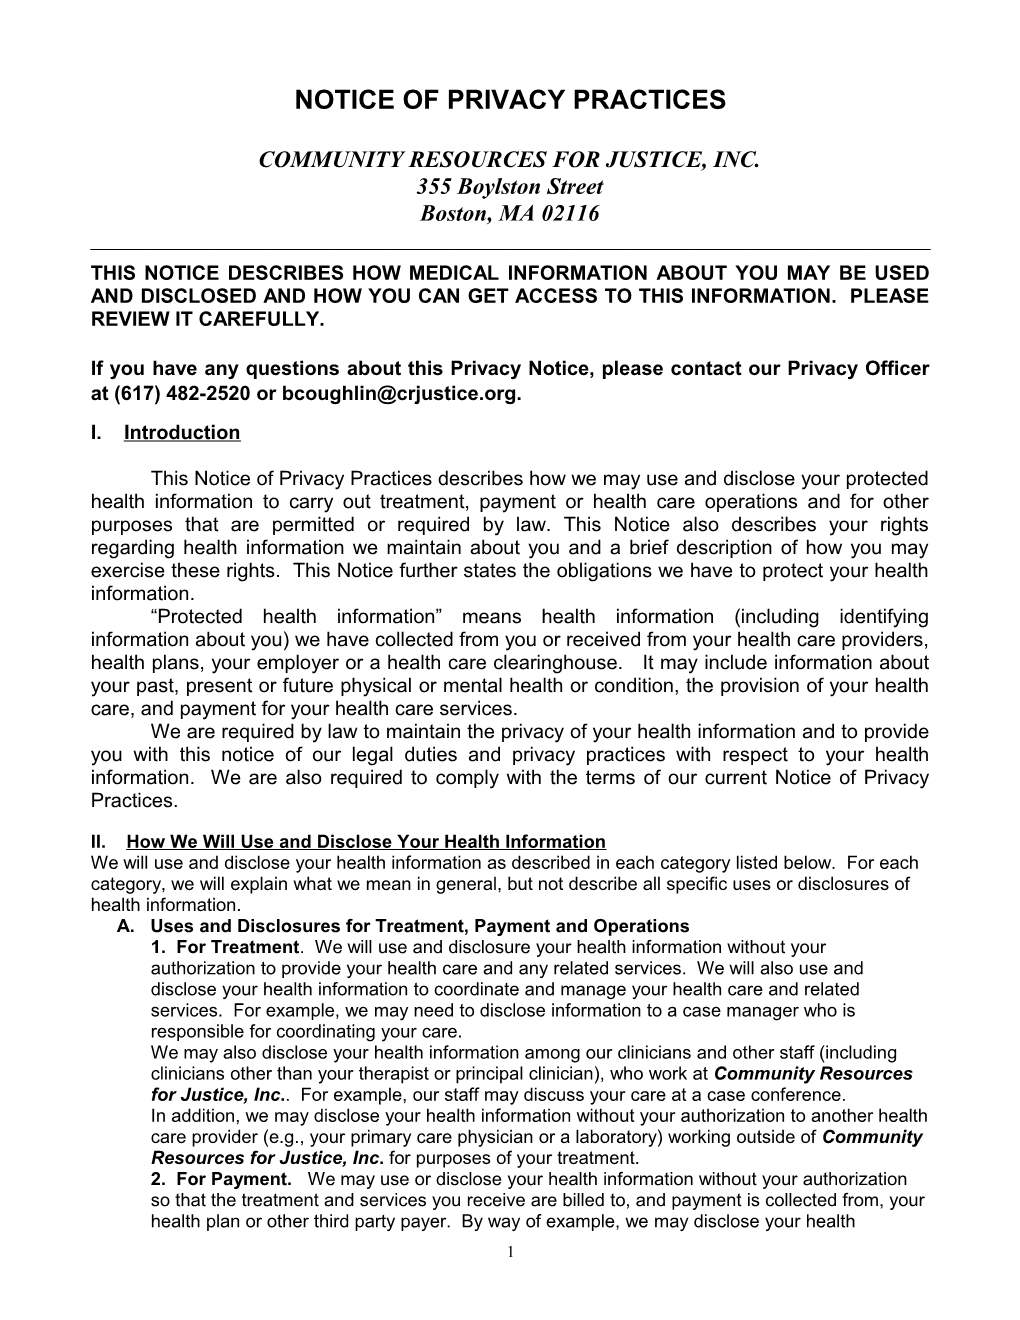 Model Notice of Privacy Practices